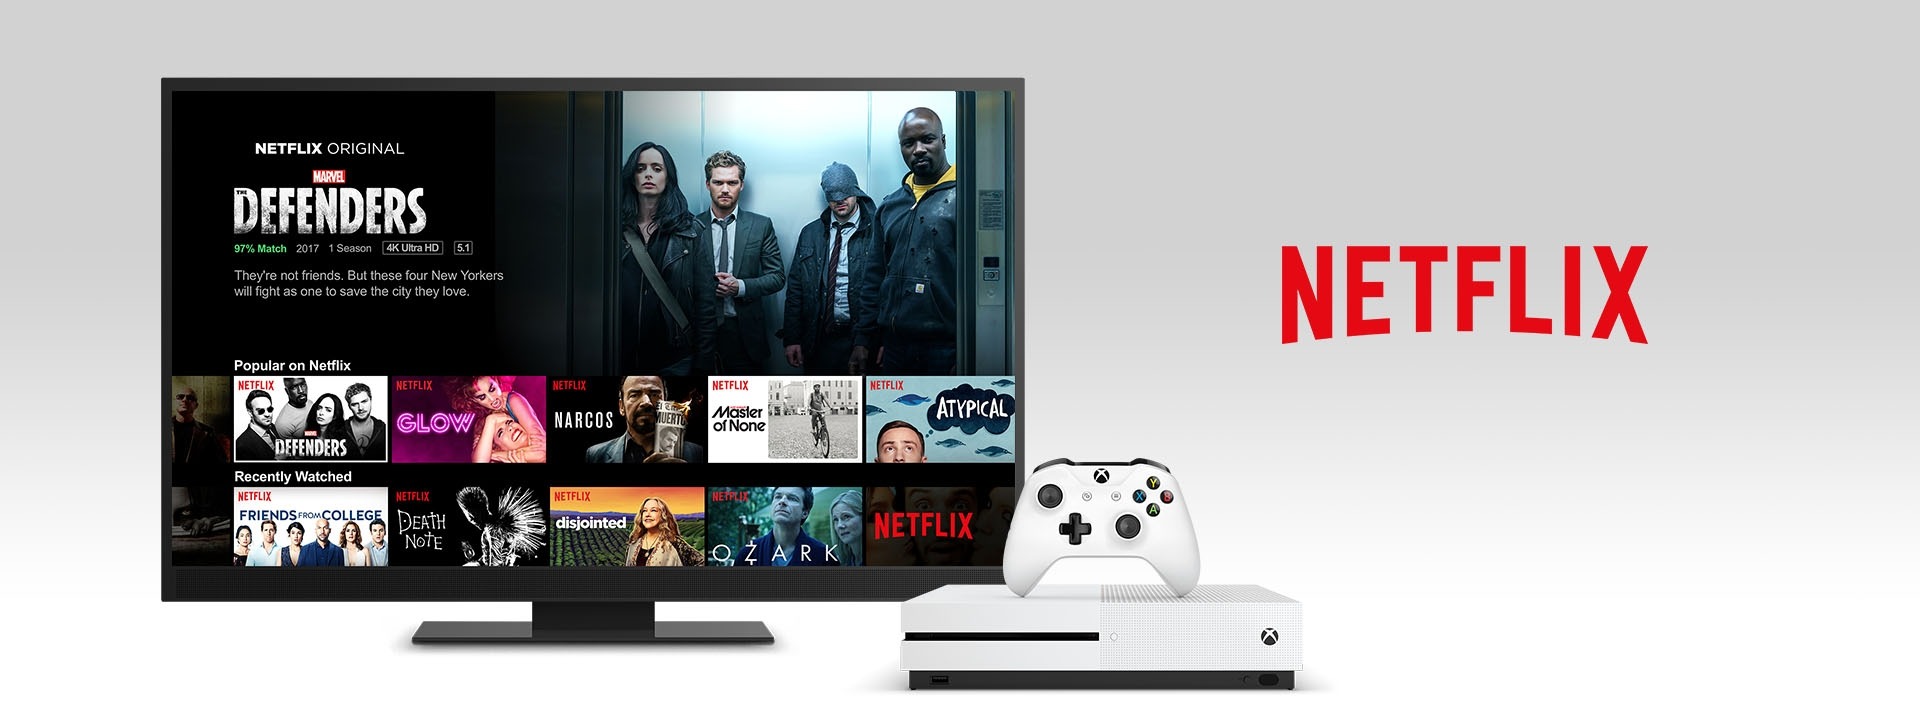 How To Log Out Of Netflix On Xbox